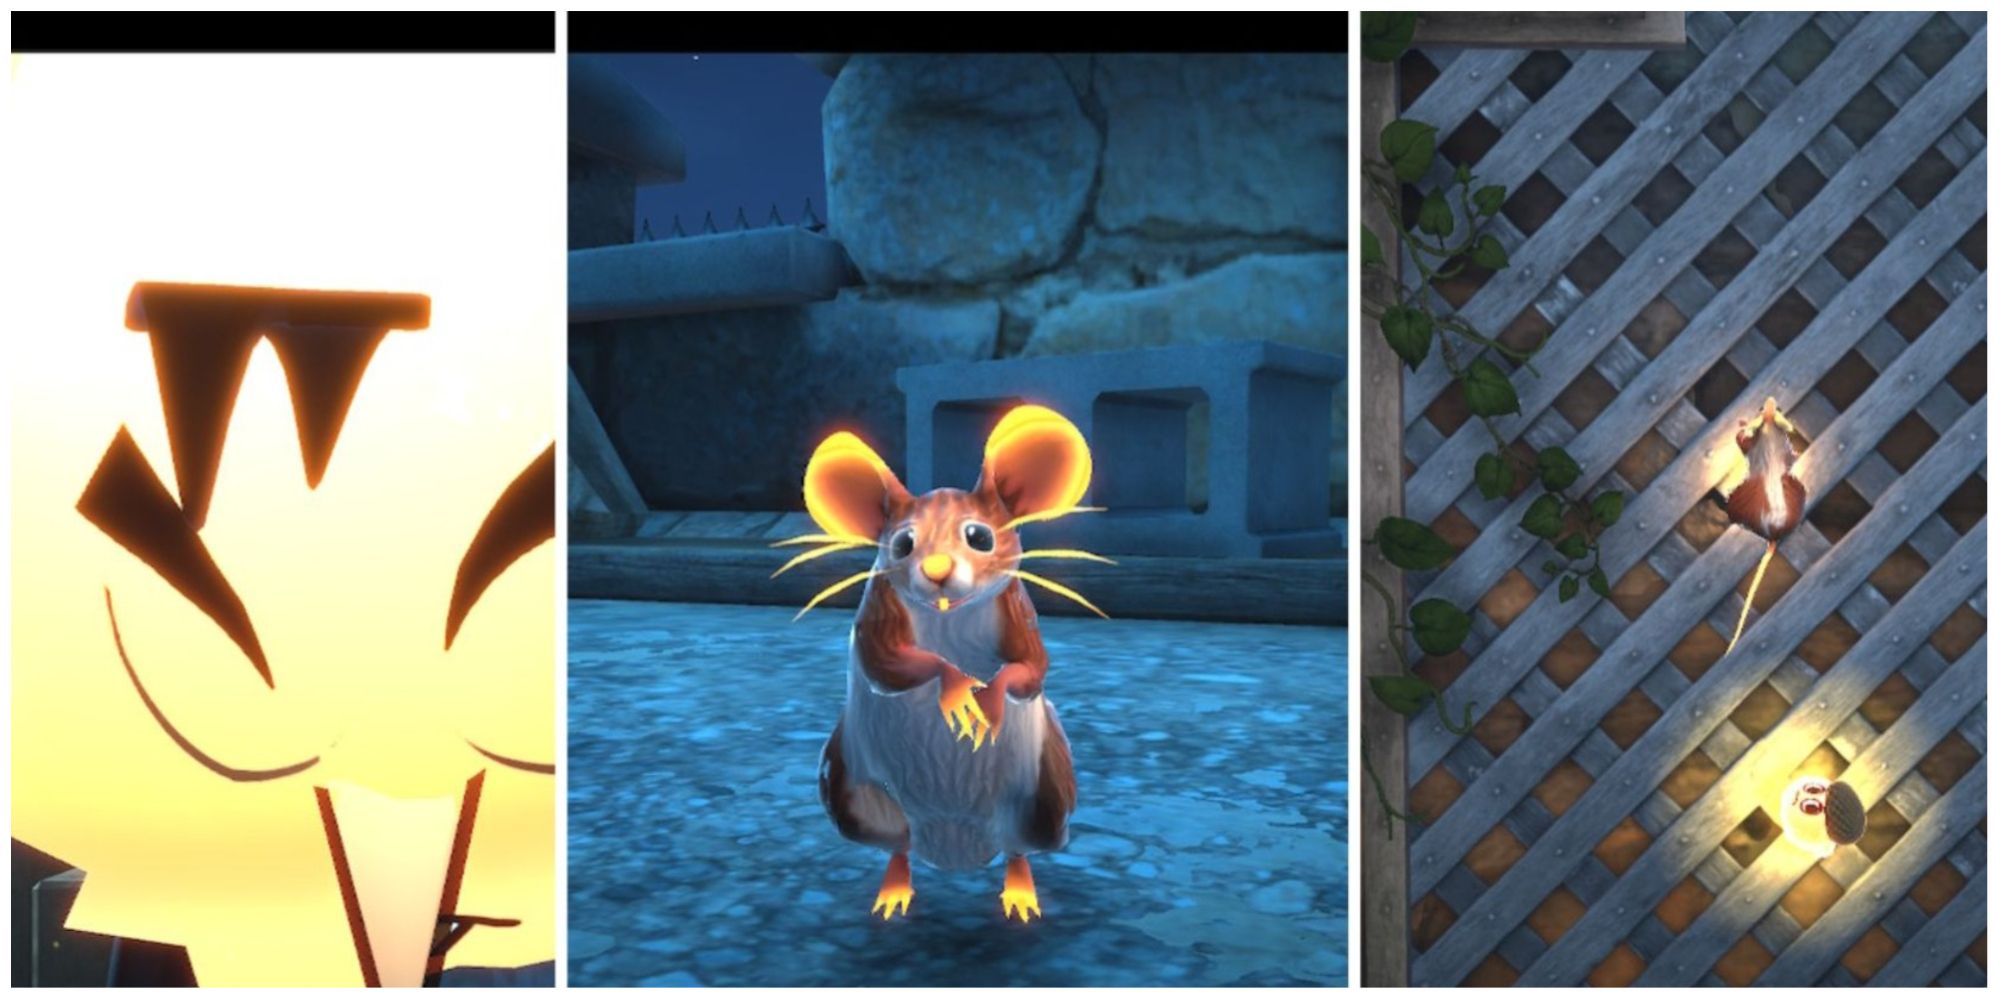 A collage of the Spirit, the Mouse, and the Mouse climbing in The Spirit And The Mouse.